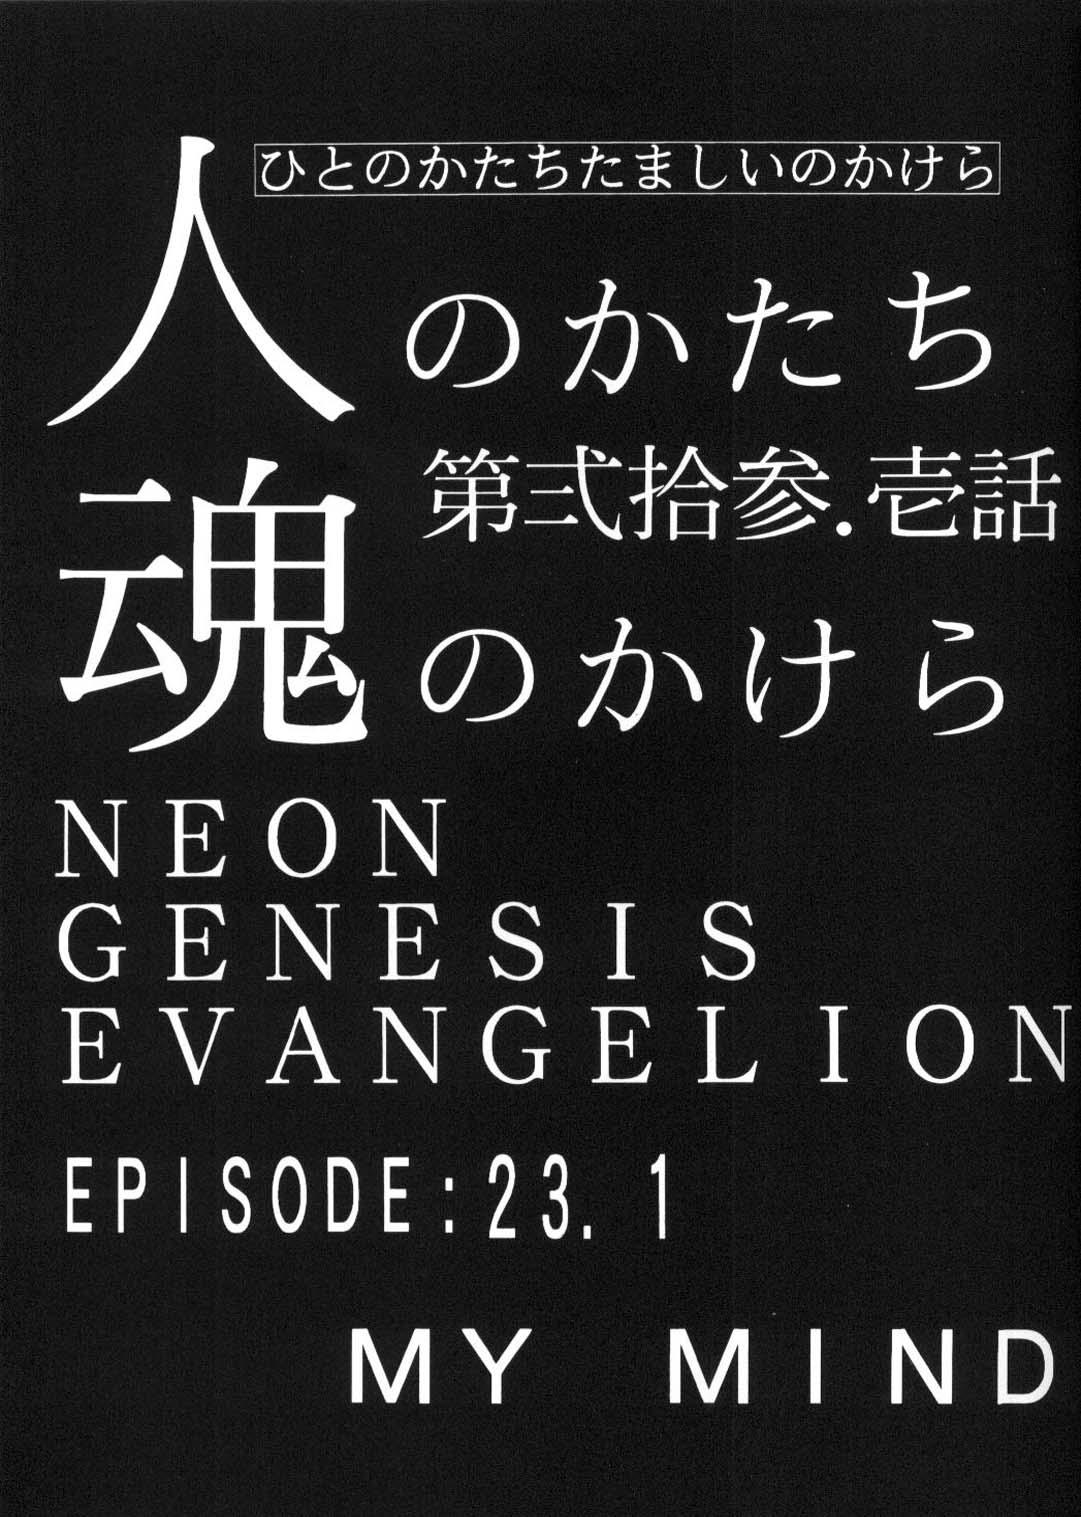 Stockings Expedia Ver 1.0A - Neon genesis evangelion Guyonshemale - Page 4